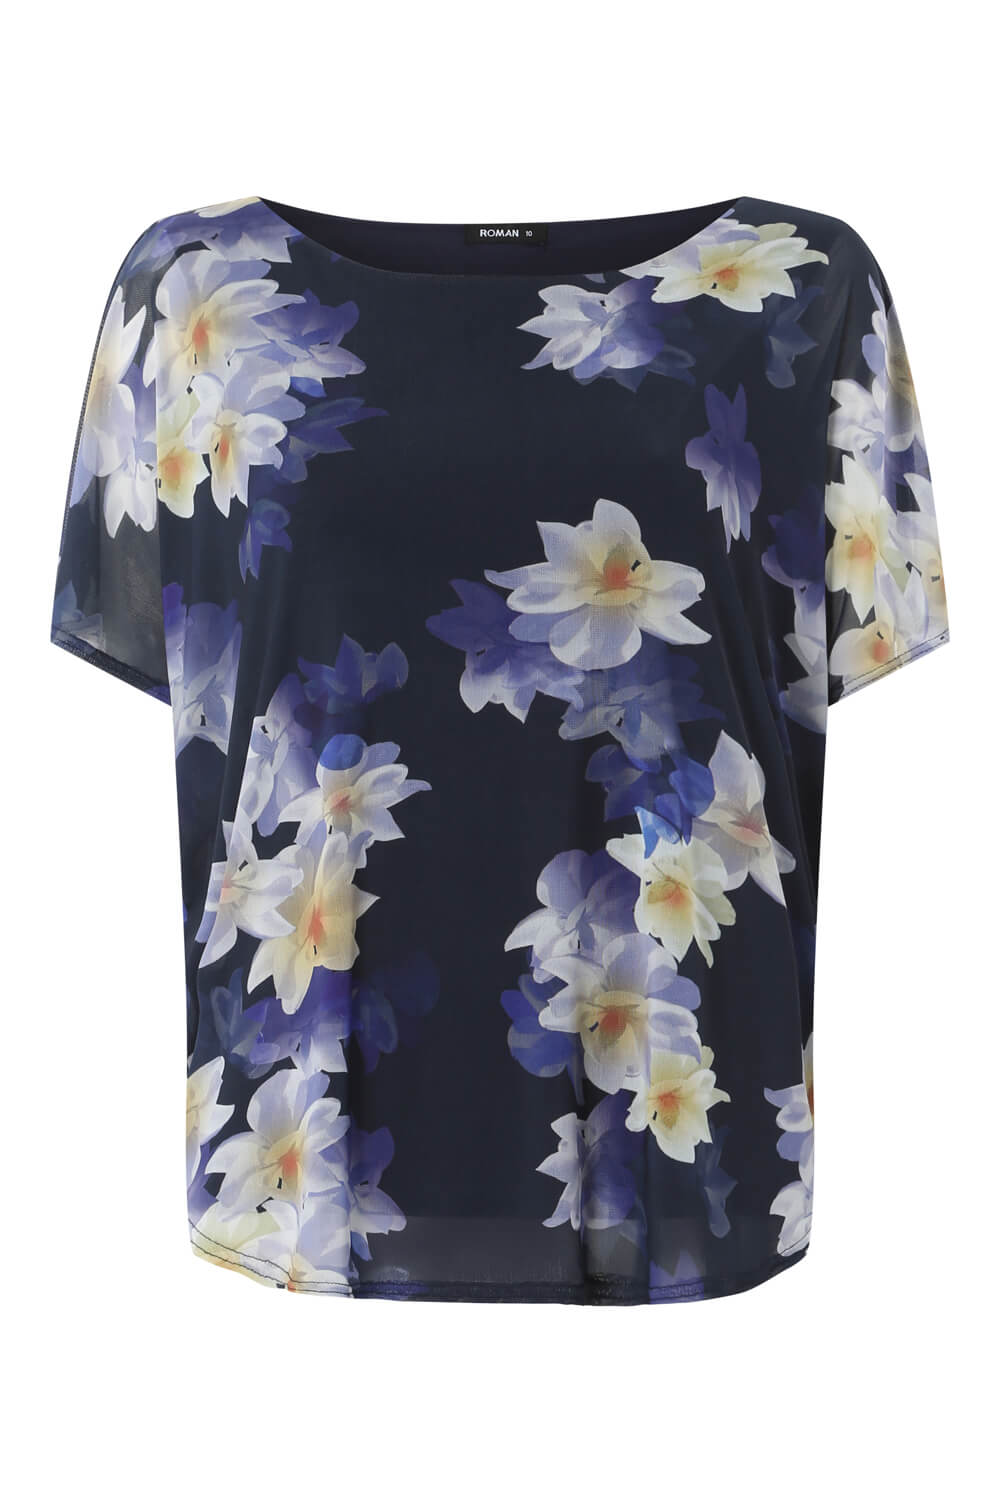 Blue Floral Chiffon Overlay Top, Image 4 of 8